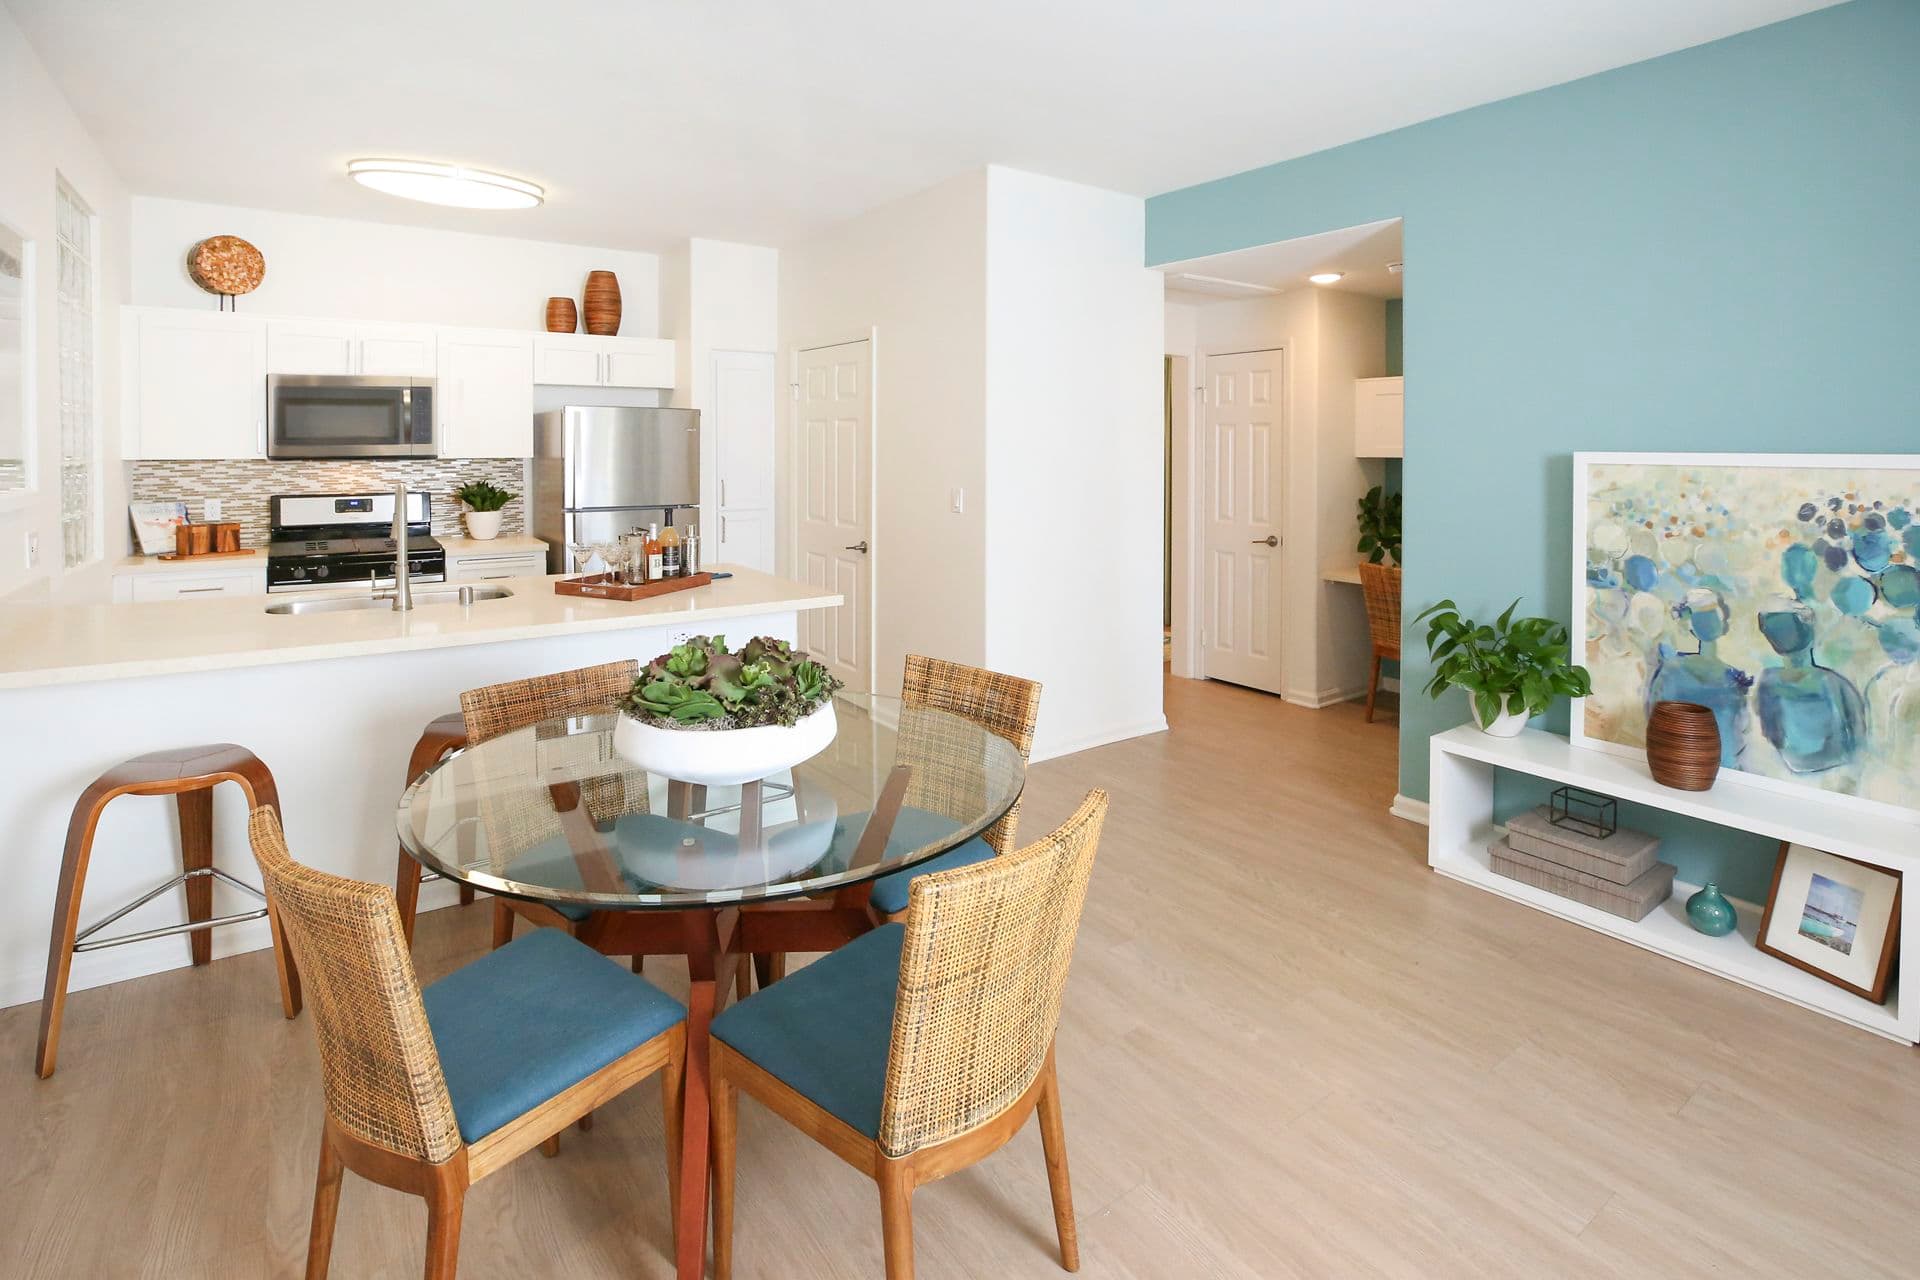 Interior view of kitchen and dining room at Del Rio Apartment Homes in Mission Valley, CA.